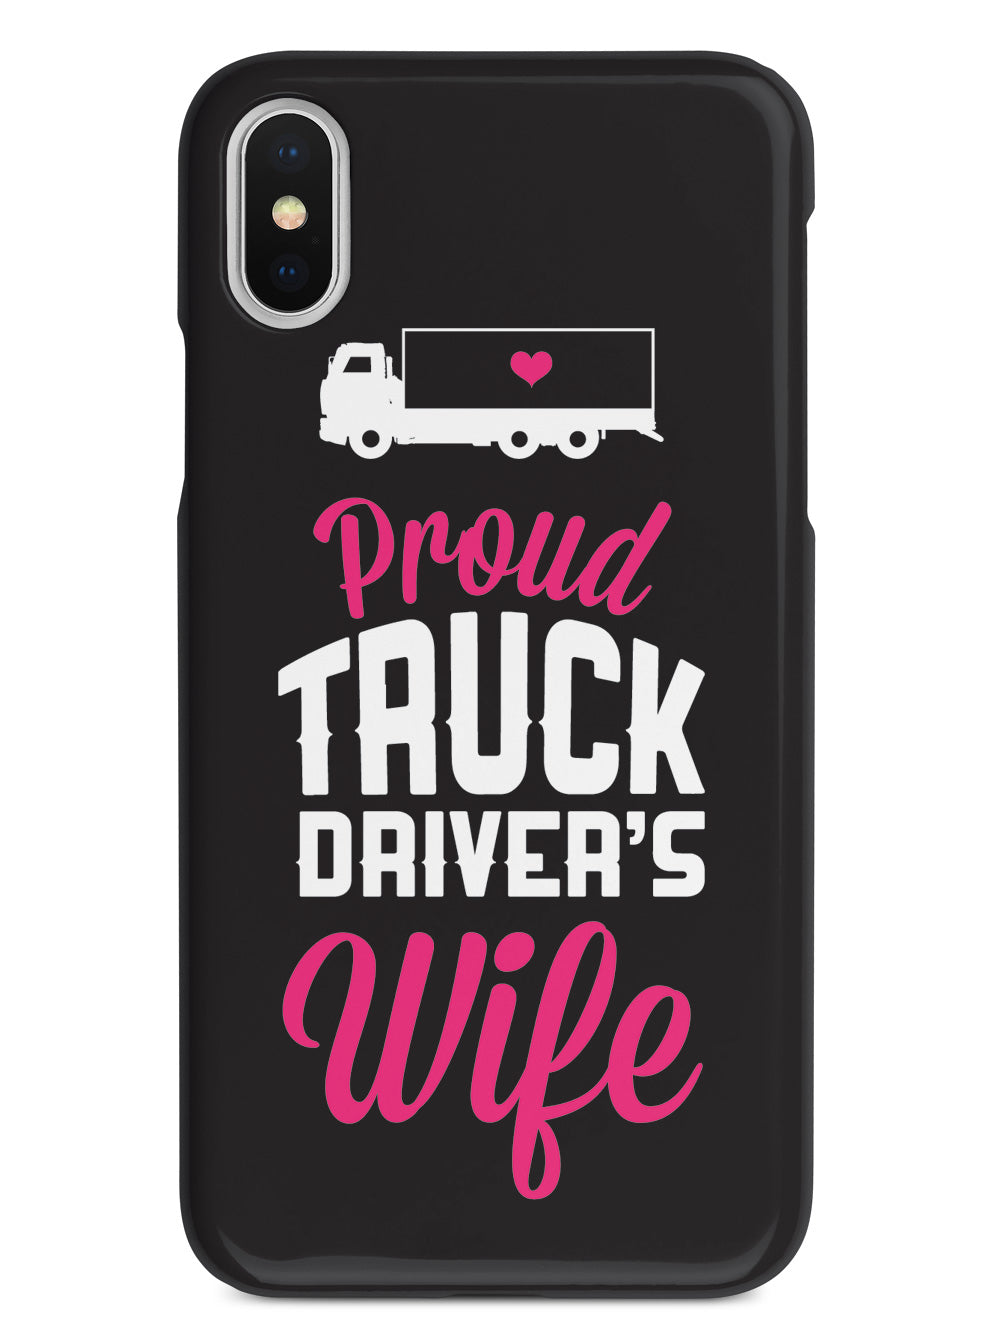 Proud Truck Driver's Wife Case